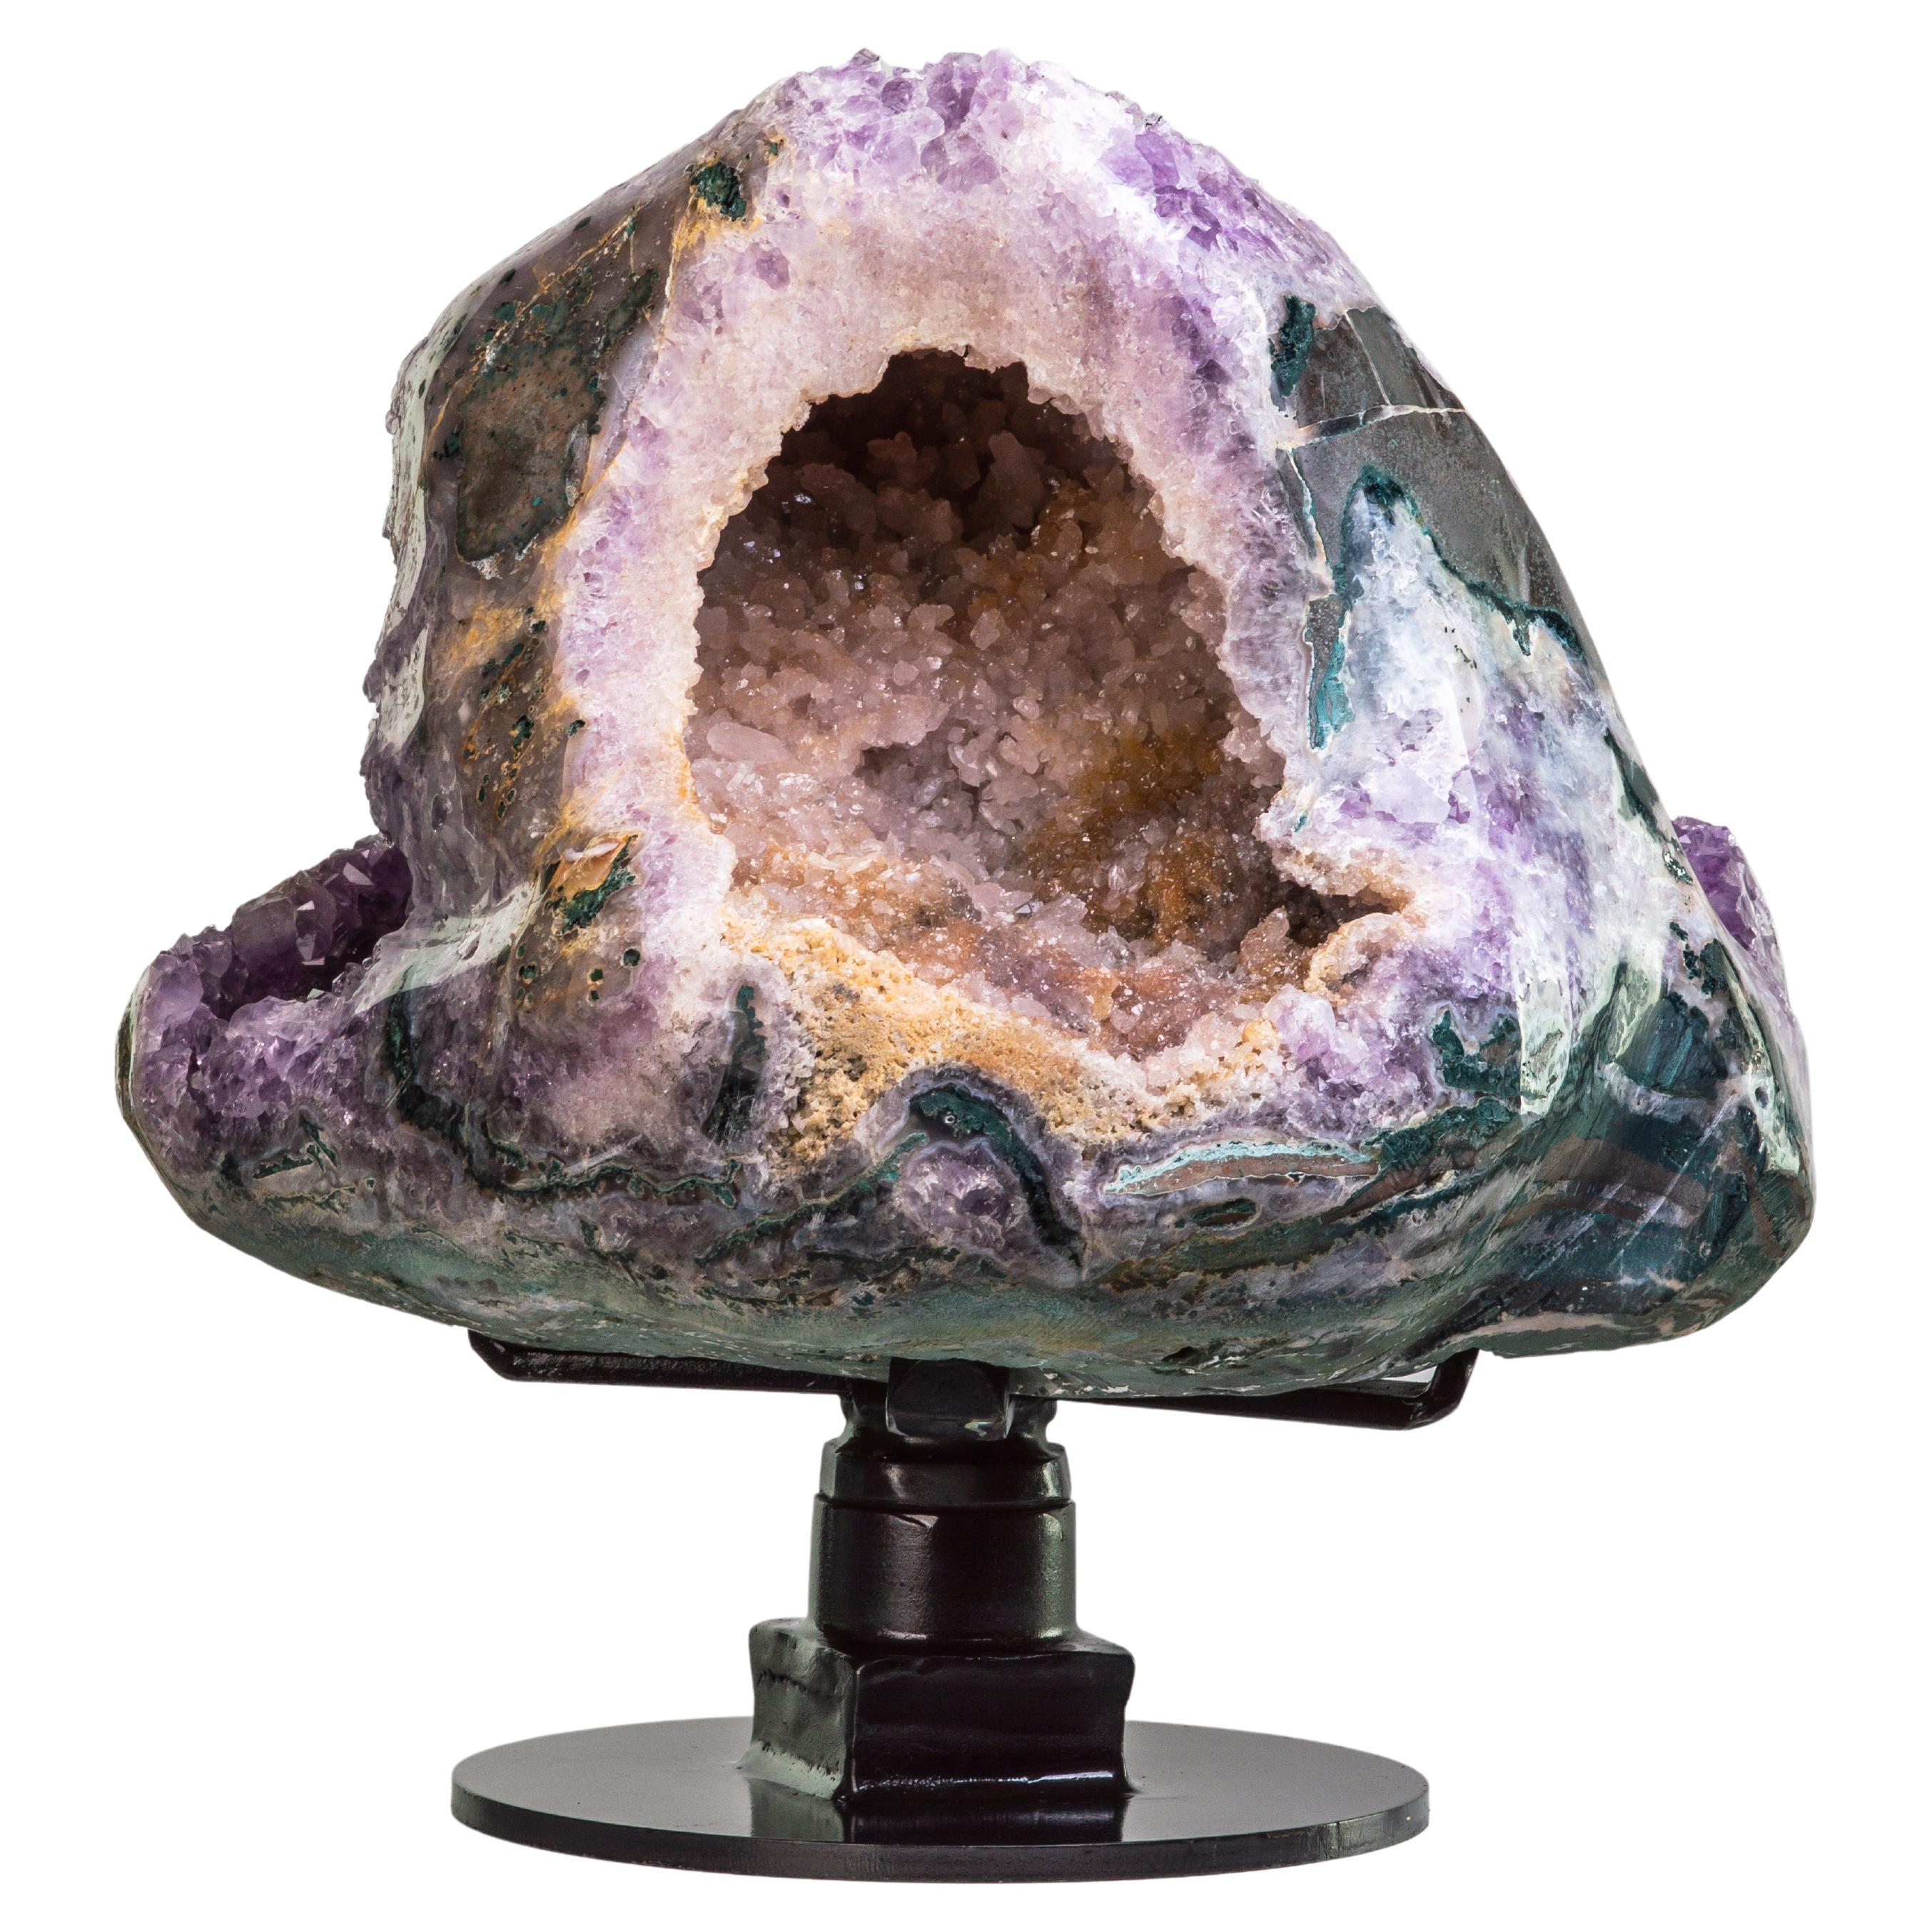 Geode Heart with Rare Formations and Double Colour Crystals Amethyst and Quartz For Sale